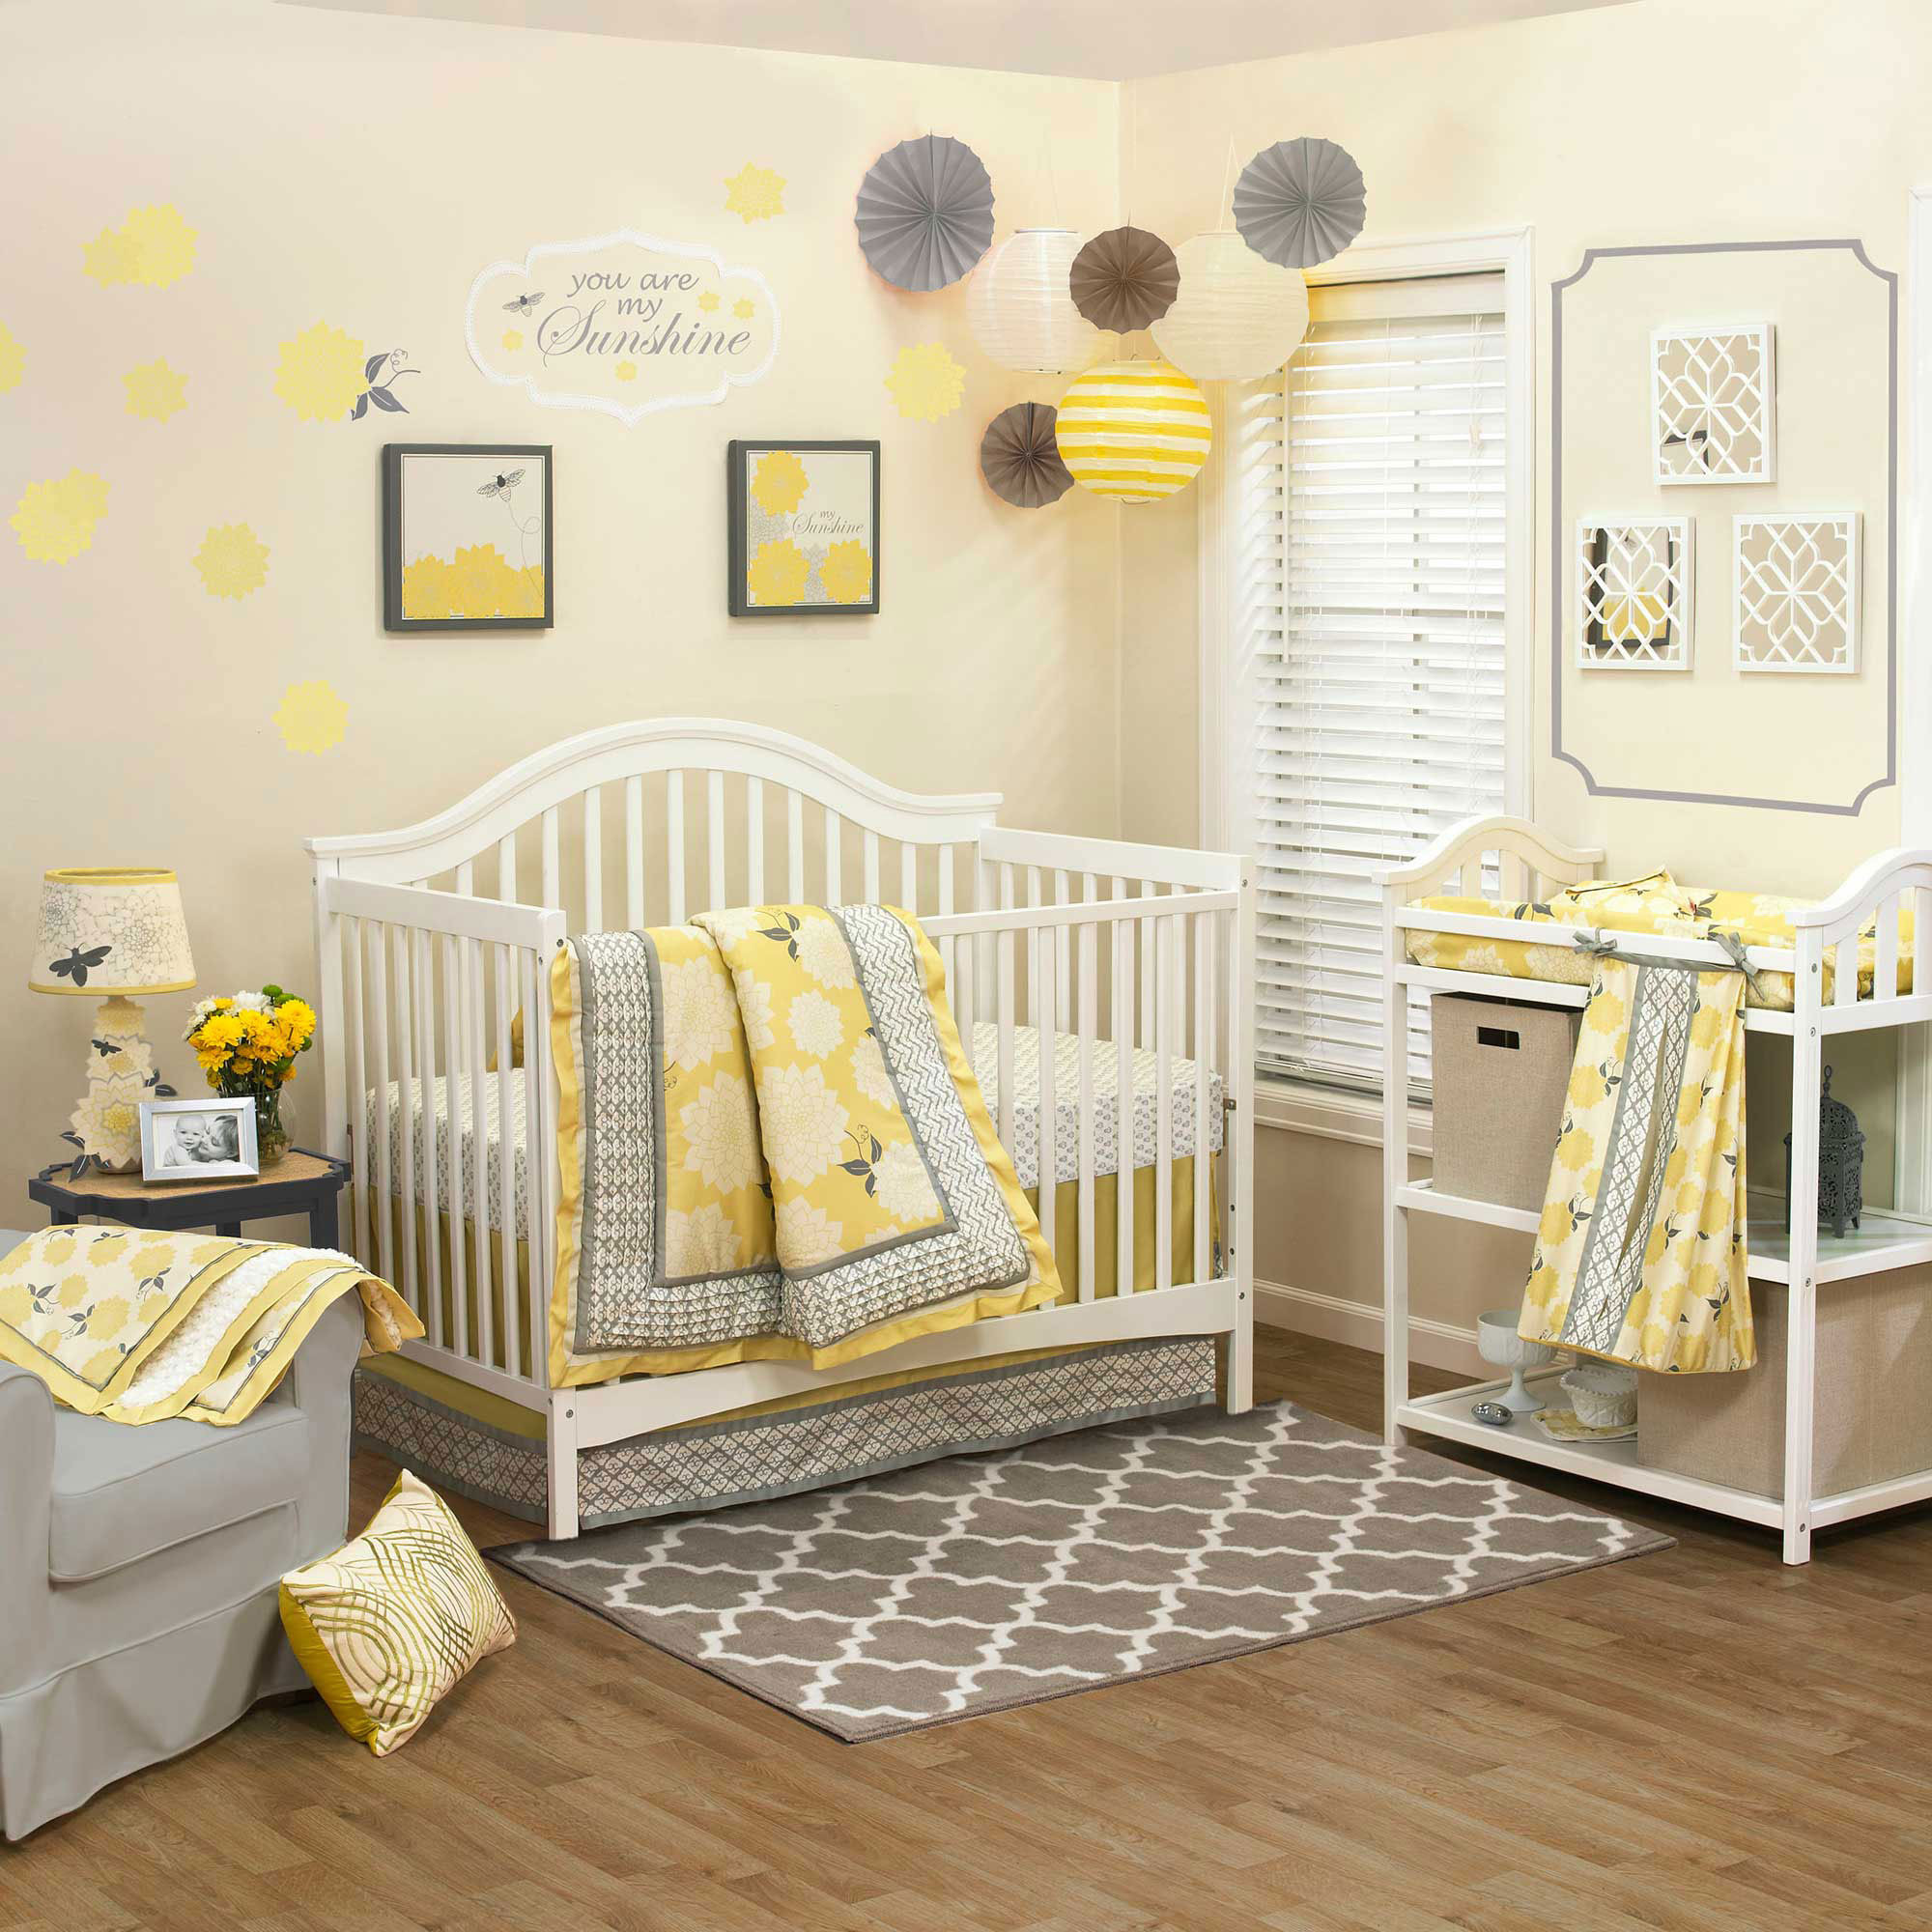 Room Decoration For Baby
 Baby Girl Nursery Ideas 10 Pretty Examples Decorating Room